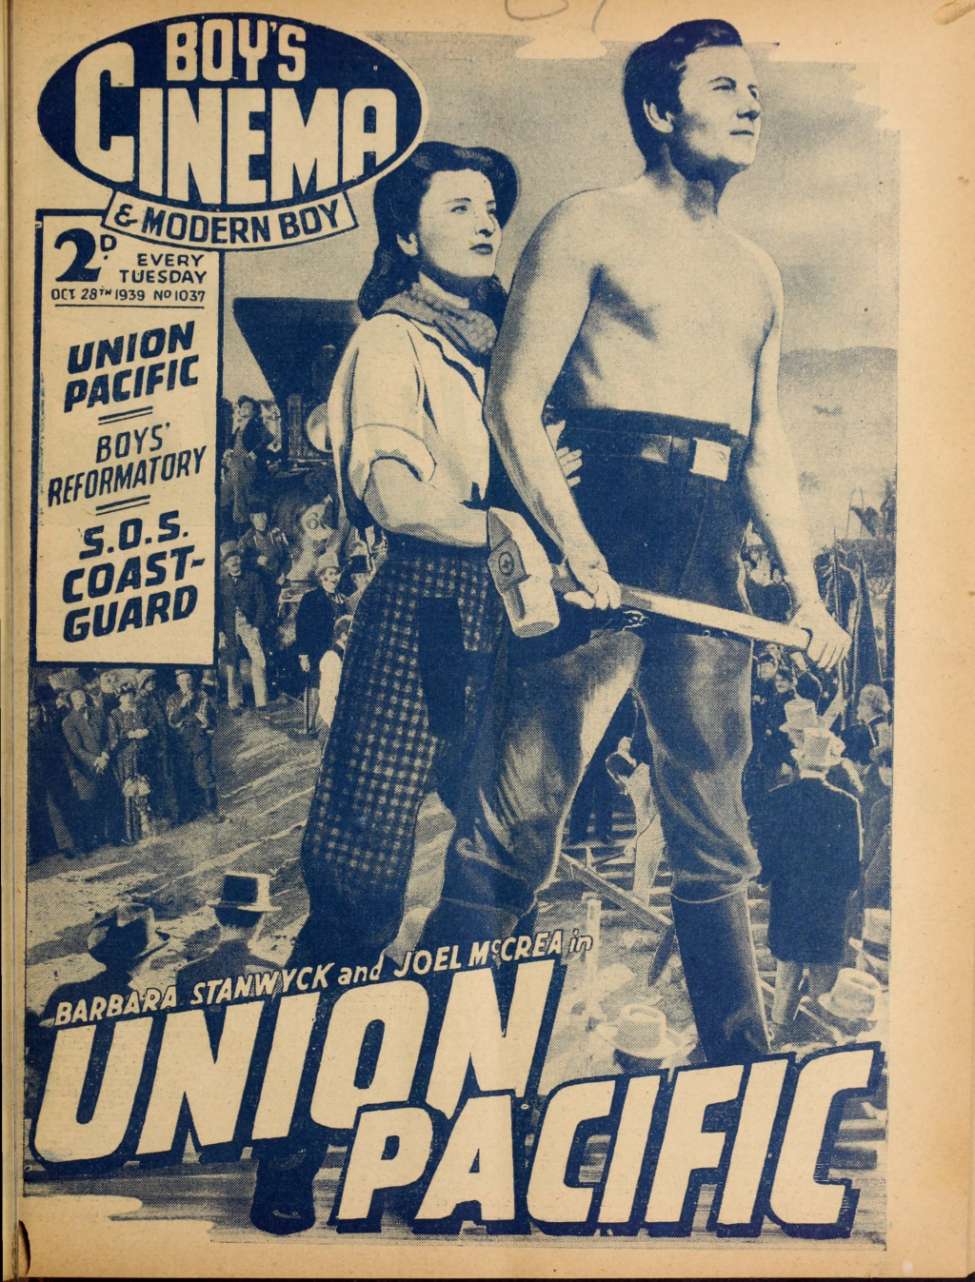 Book Cover For Boy's Cinema 1037 - Union Pacific - Barbara Stanwyck